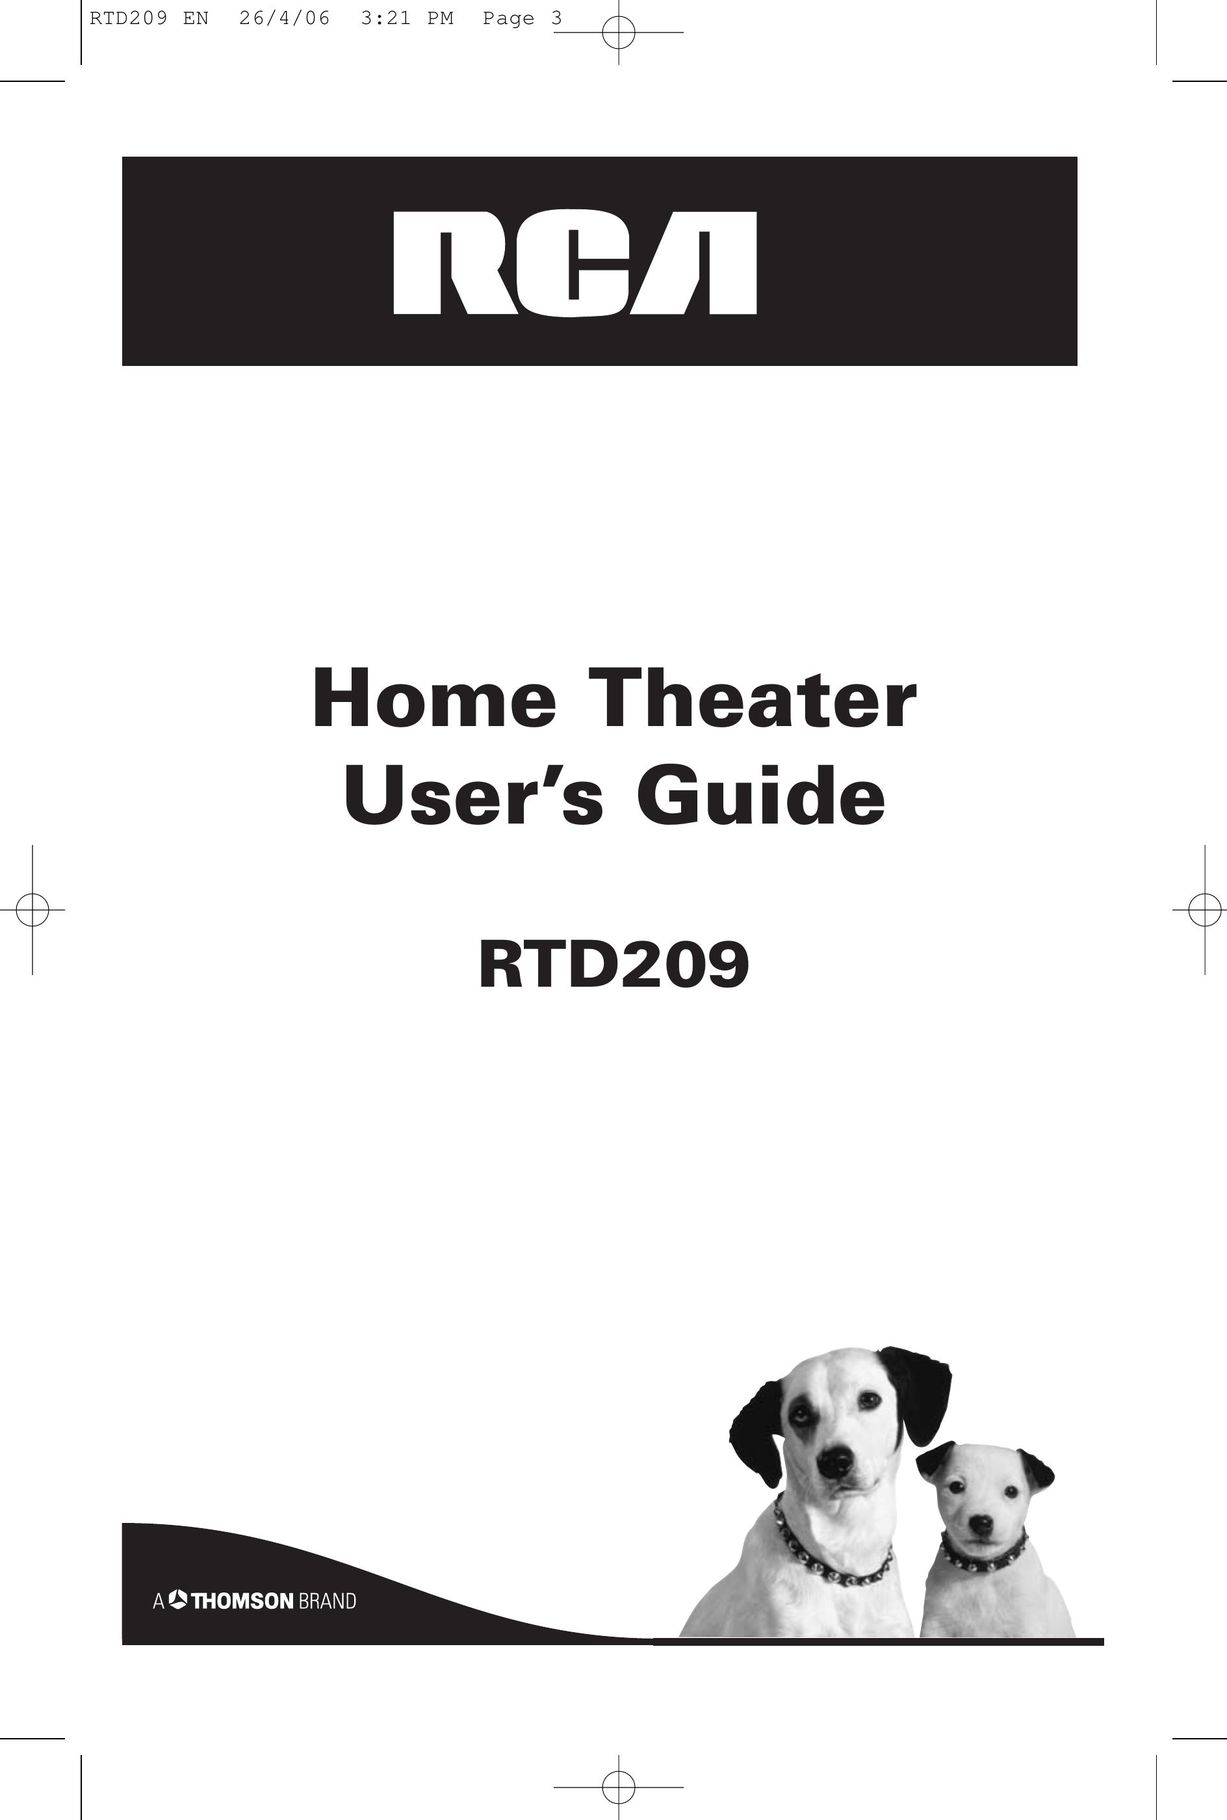 Home Theater Direct RTD209 Home Theater System User Manual